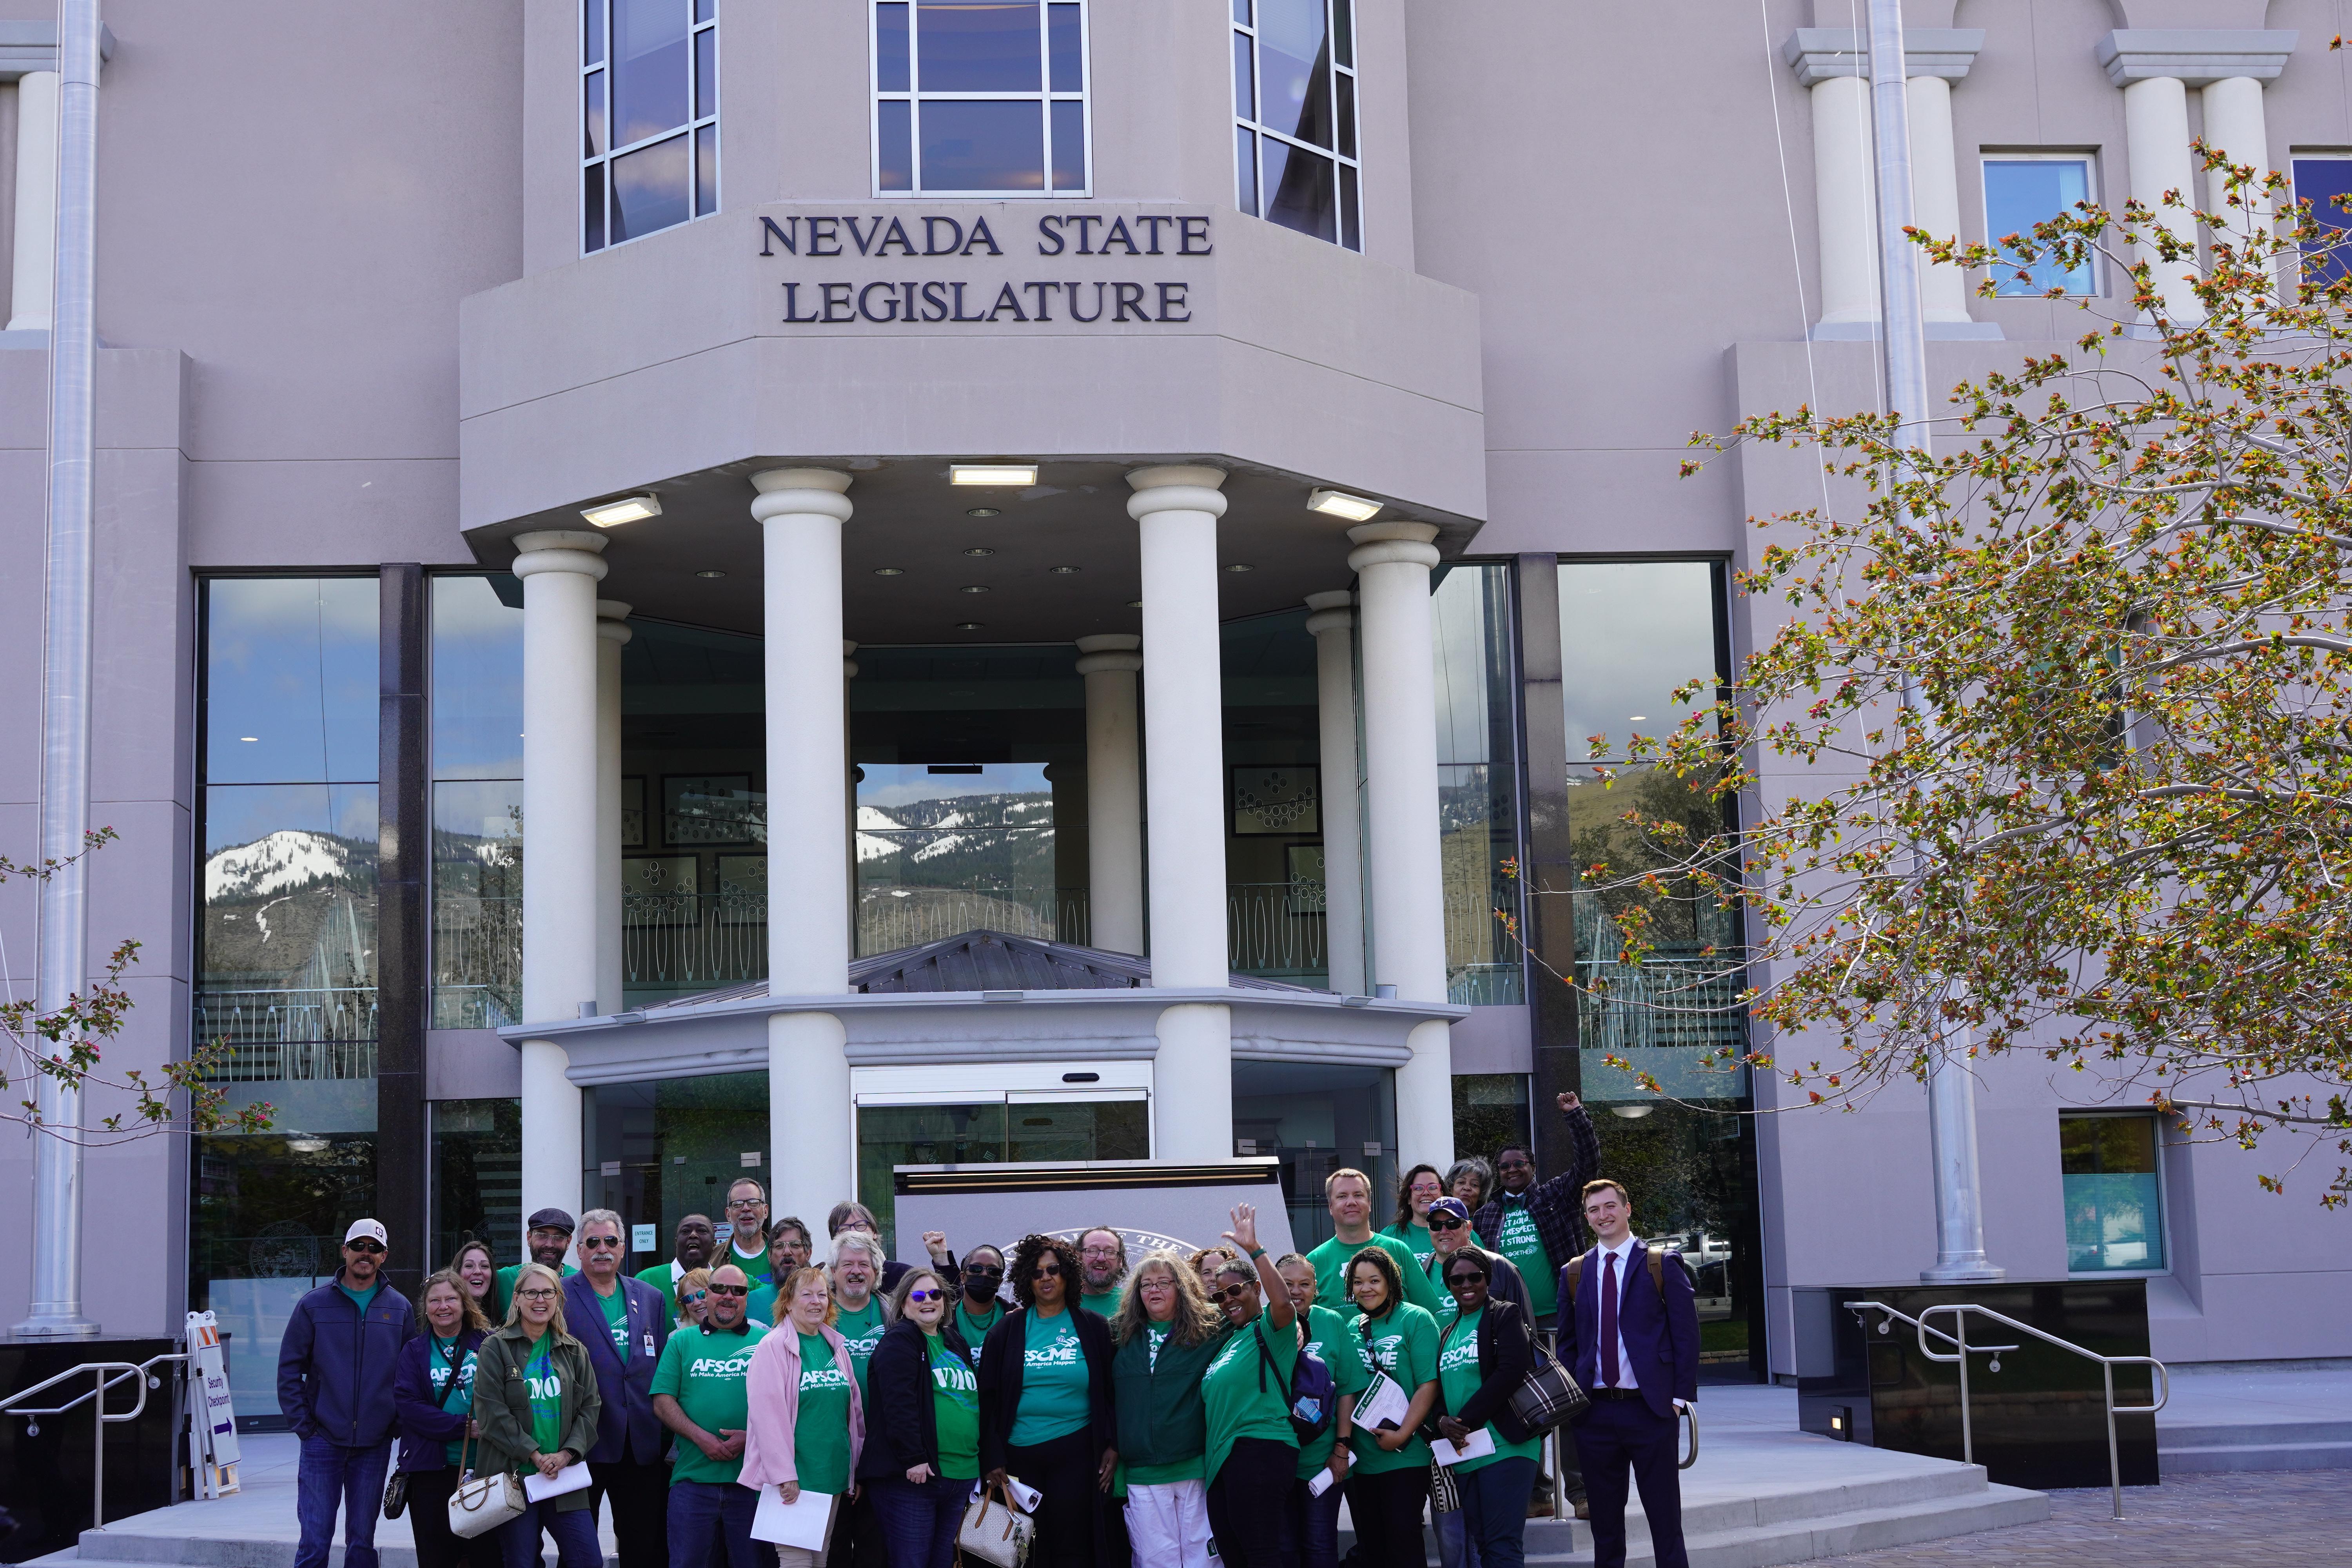 AFSCME Local 4041 members at the Nevada state legislative building